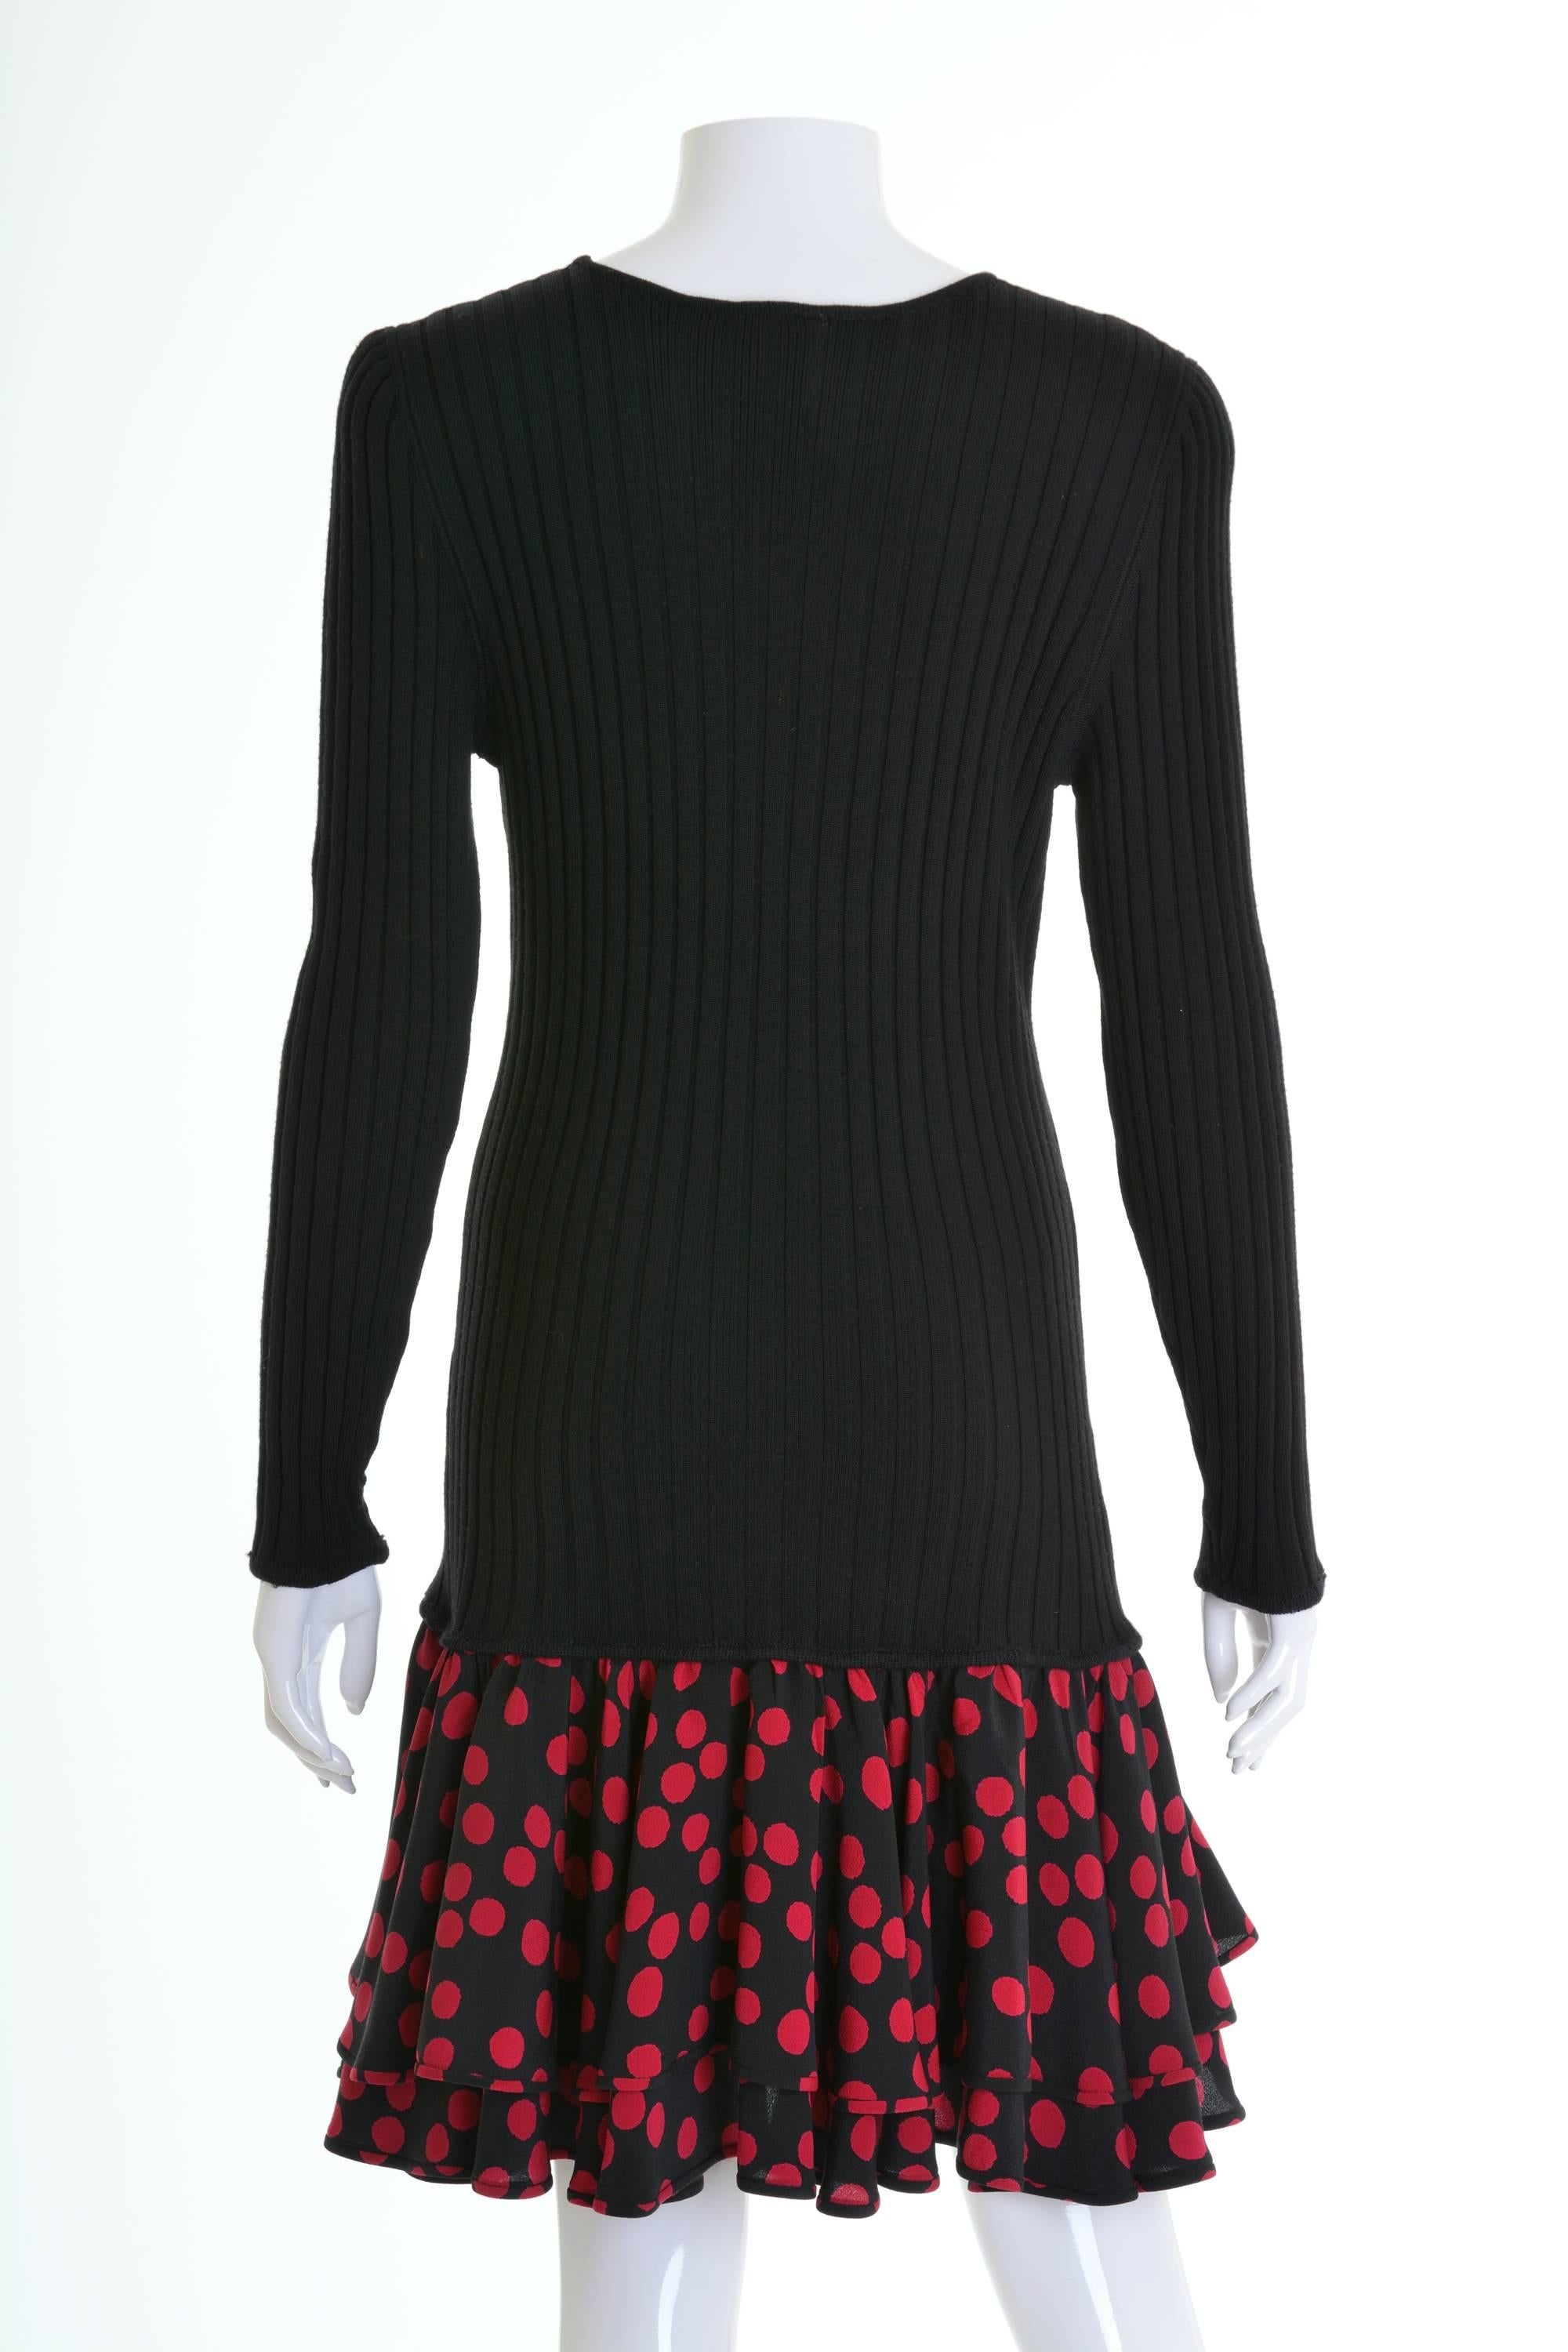 This lovely 1980s Ungaro dress is in a black knitted woolen fabric and has flounces with red magenta polka dots print black fabric. 

Very good vintage condition

Label: Ungaro Parallele Paris - Made in Italy
Fabric: wool/silk 
Color: black/red